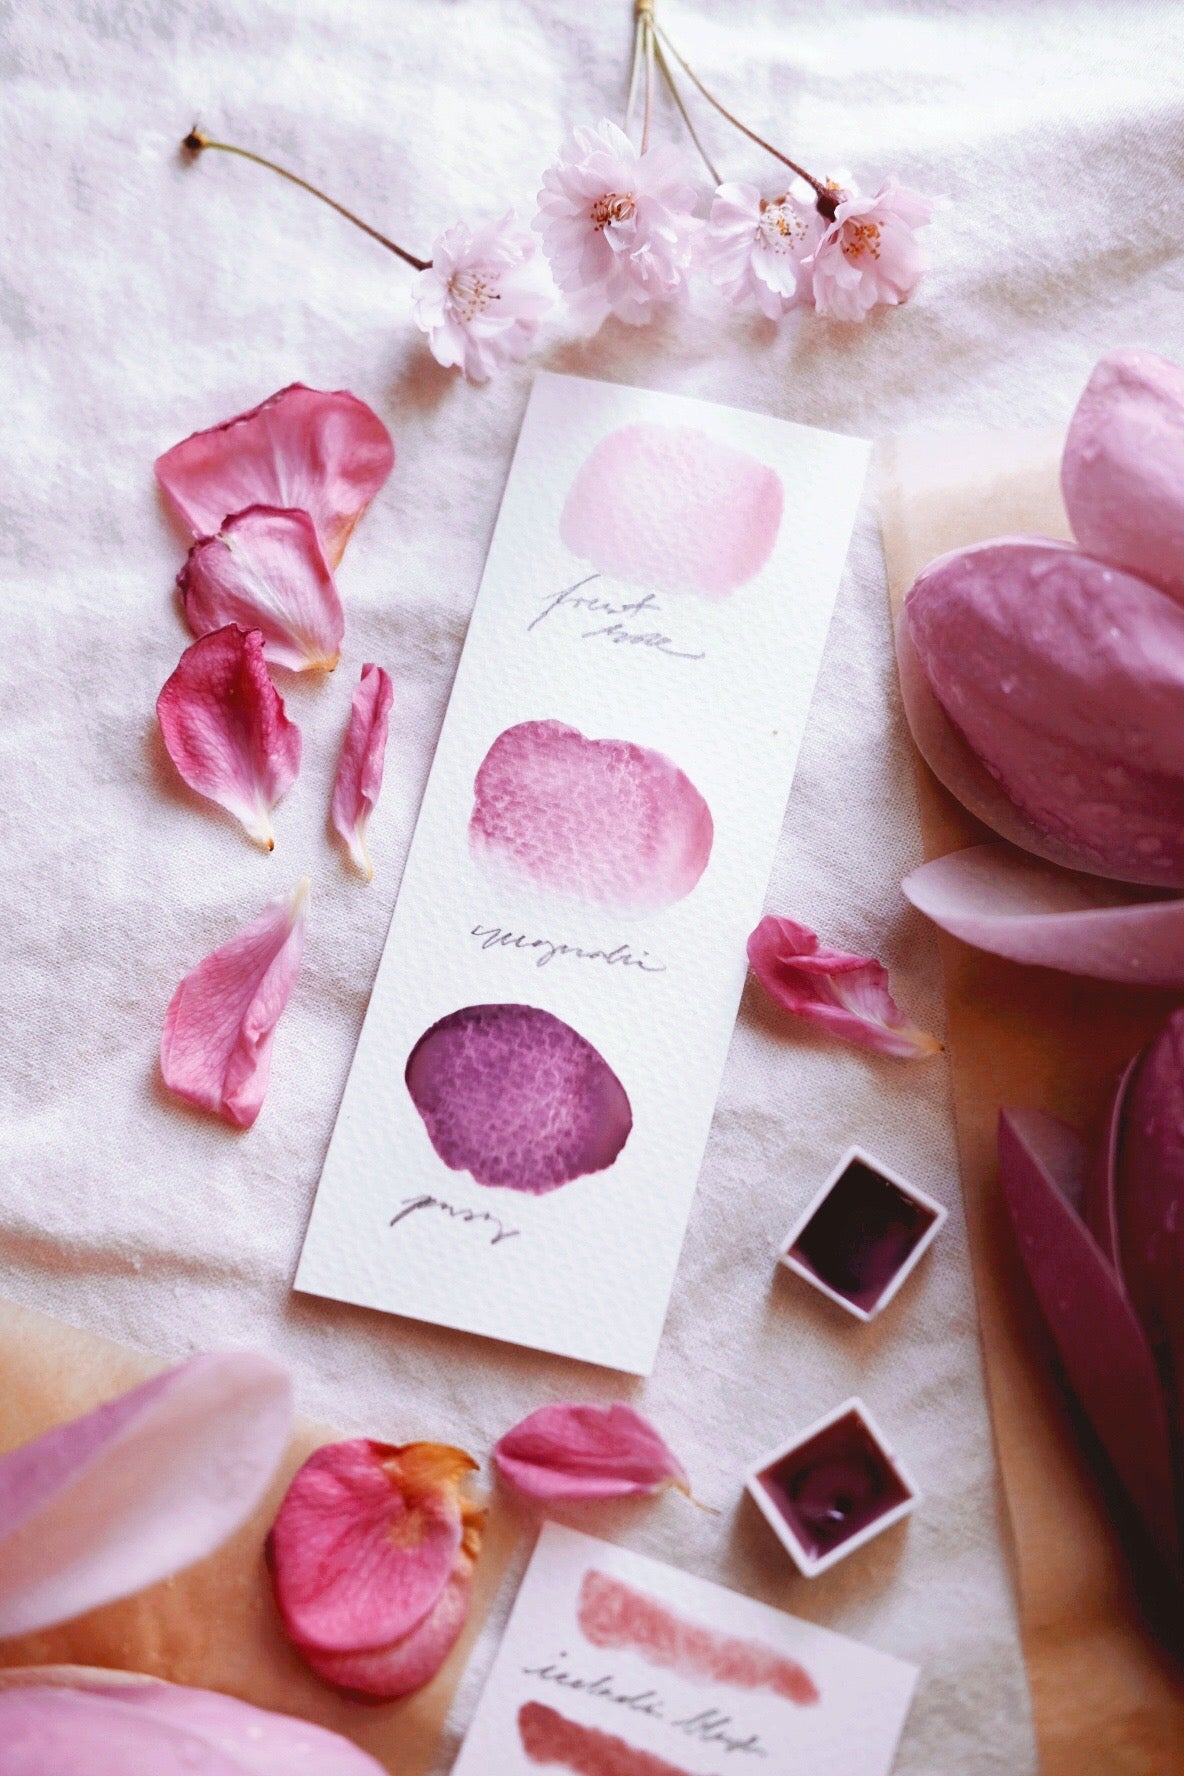 RESERVE for Arielle + Pink Blossom + Limited edition gemstone watercolor palette